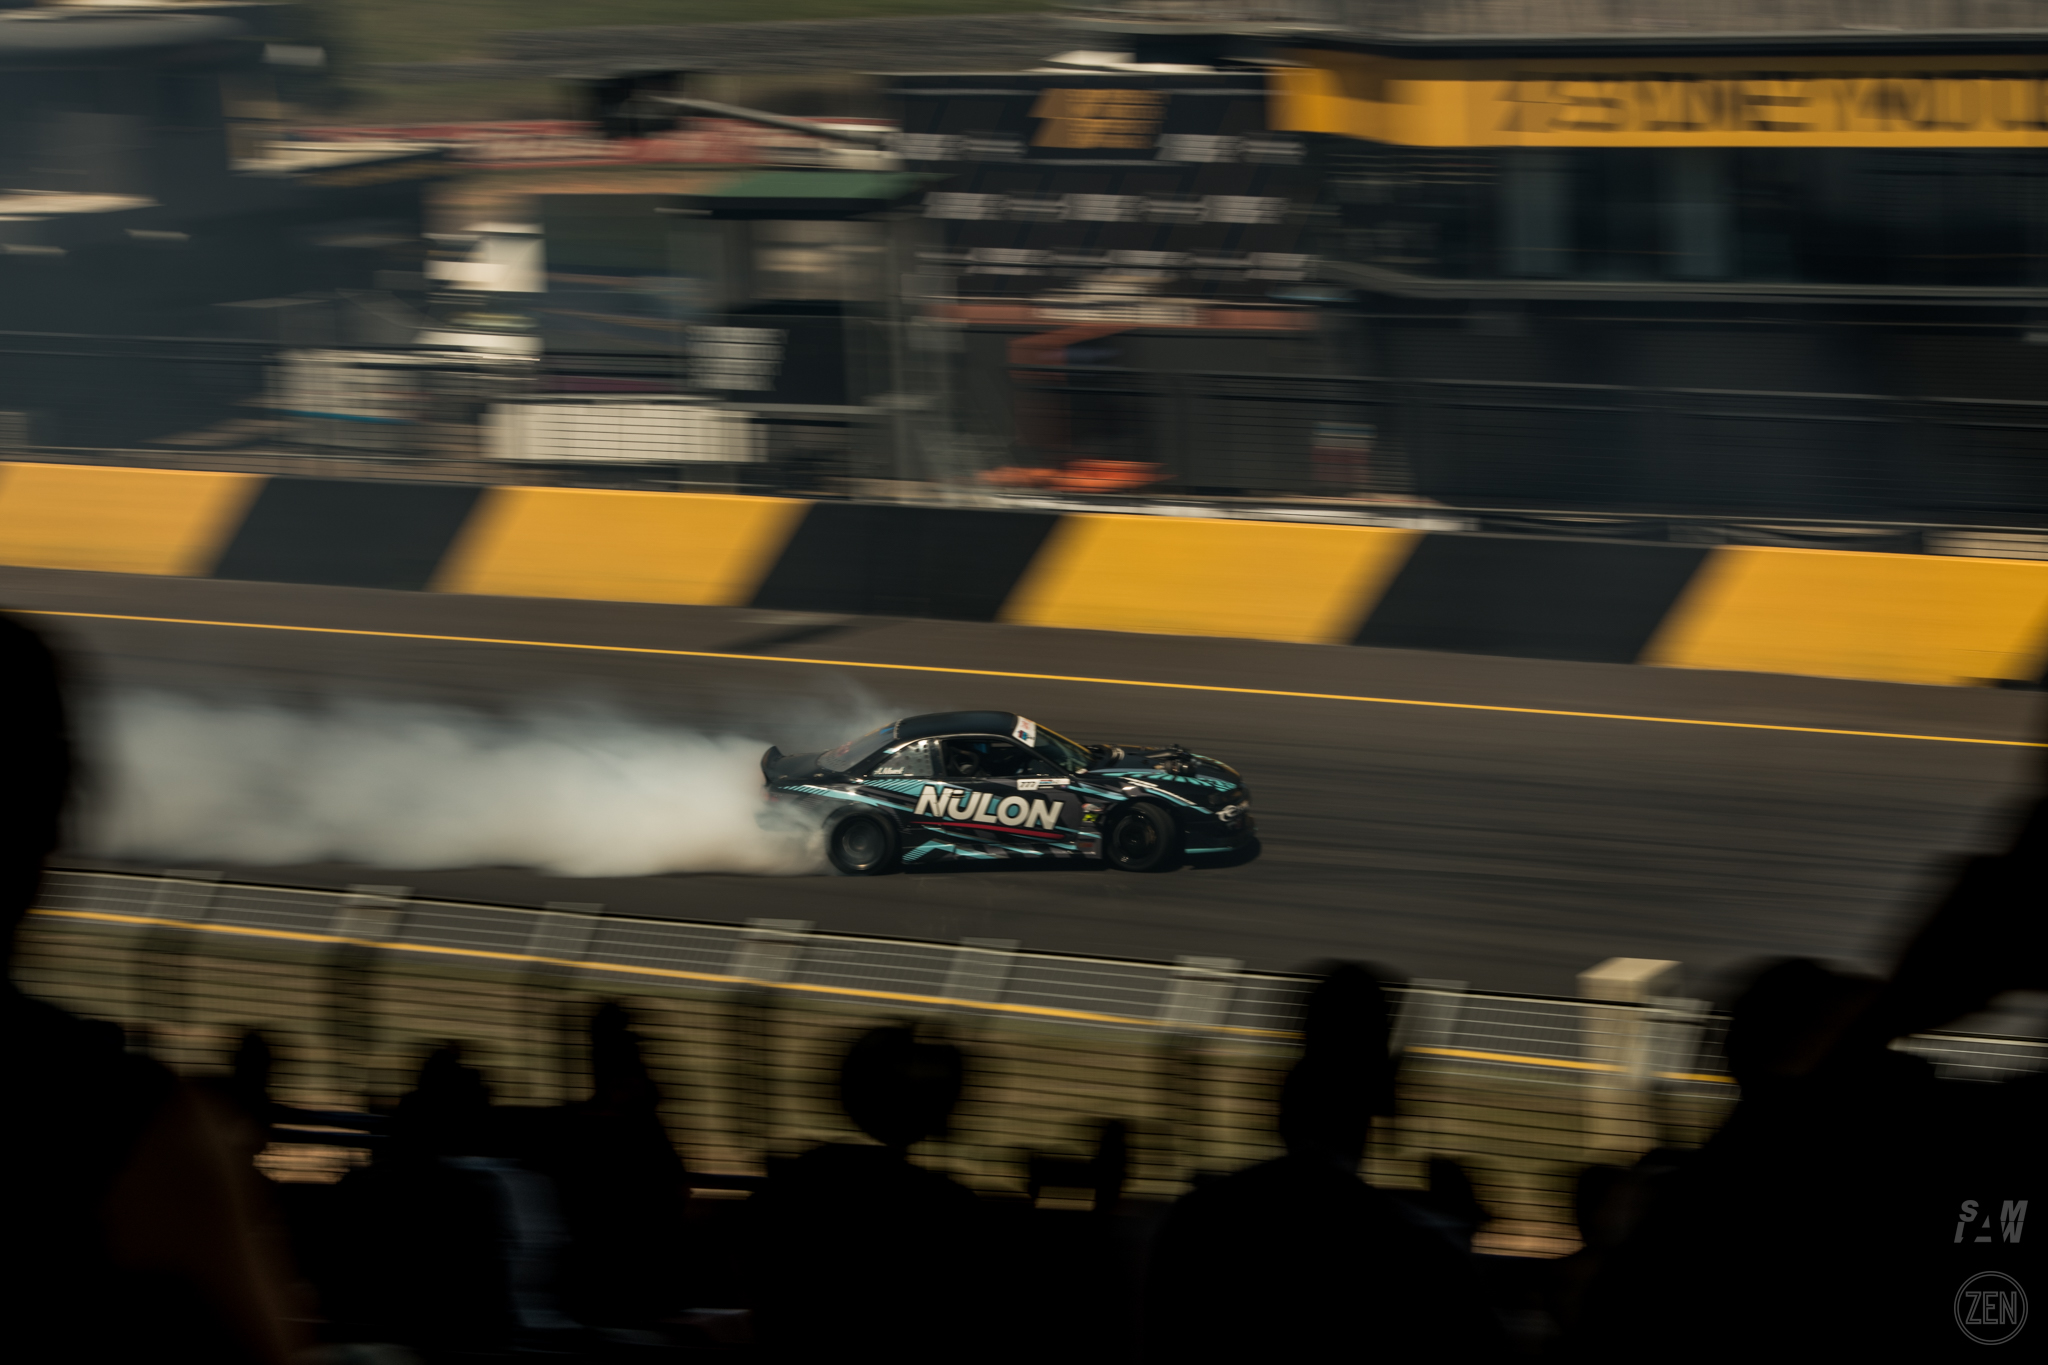 2019-10-18 - WTAC Day 01 044